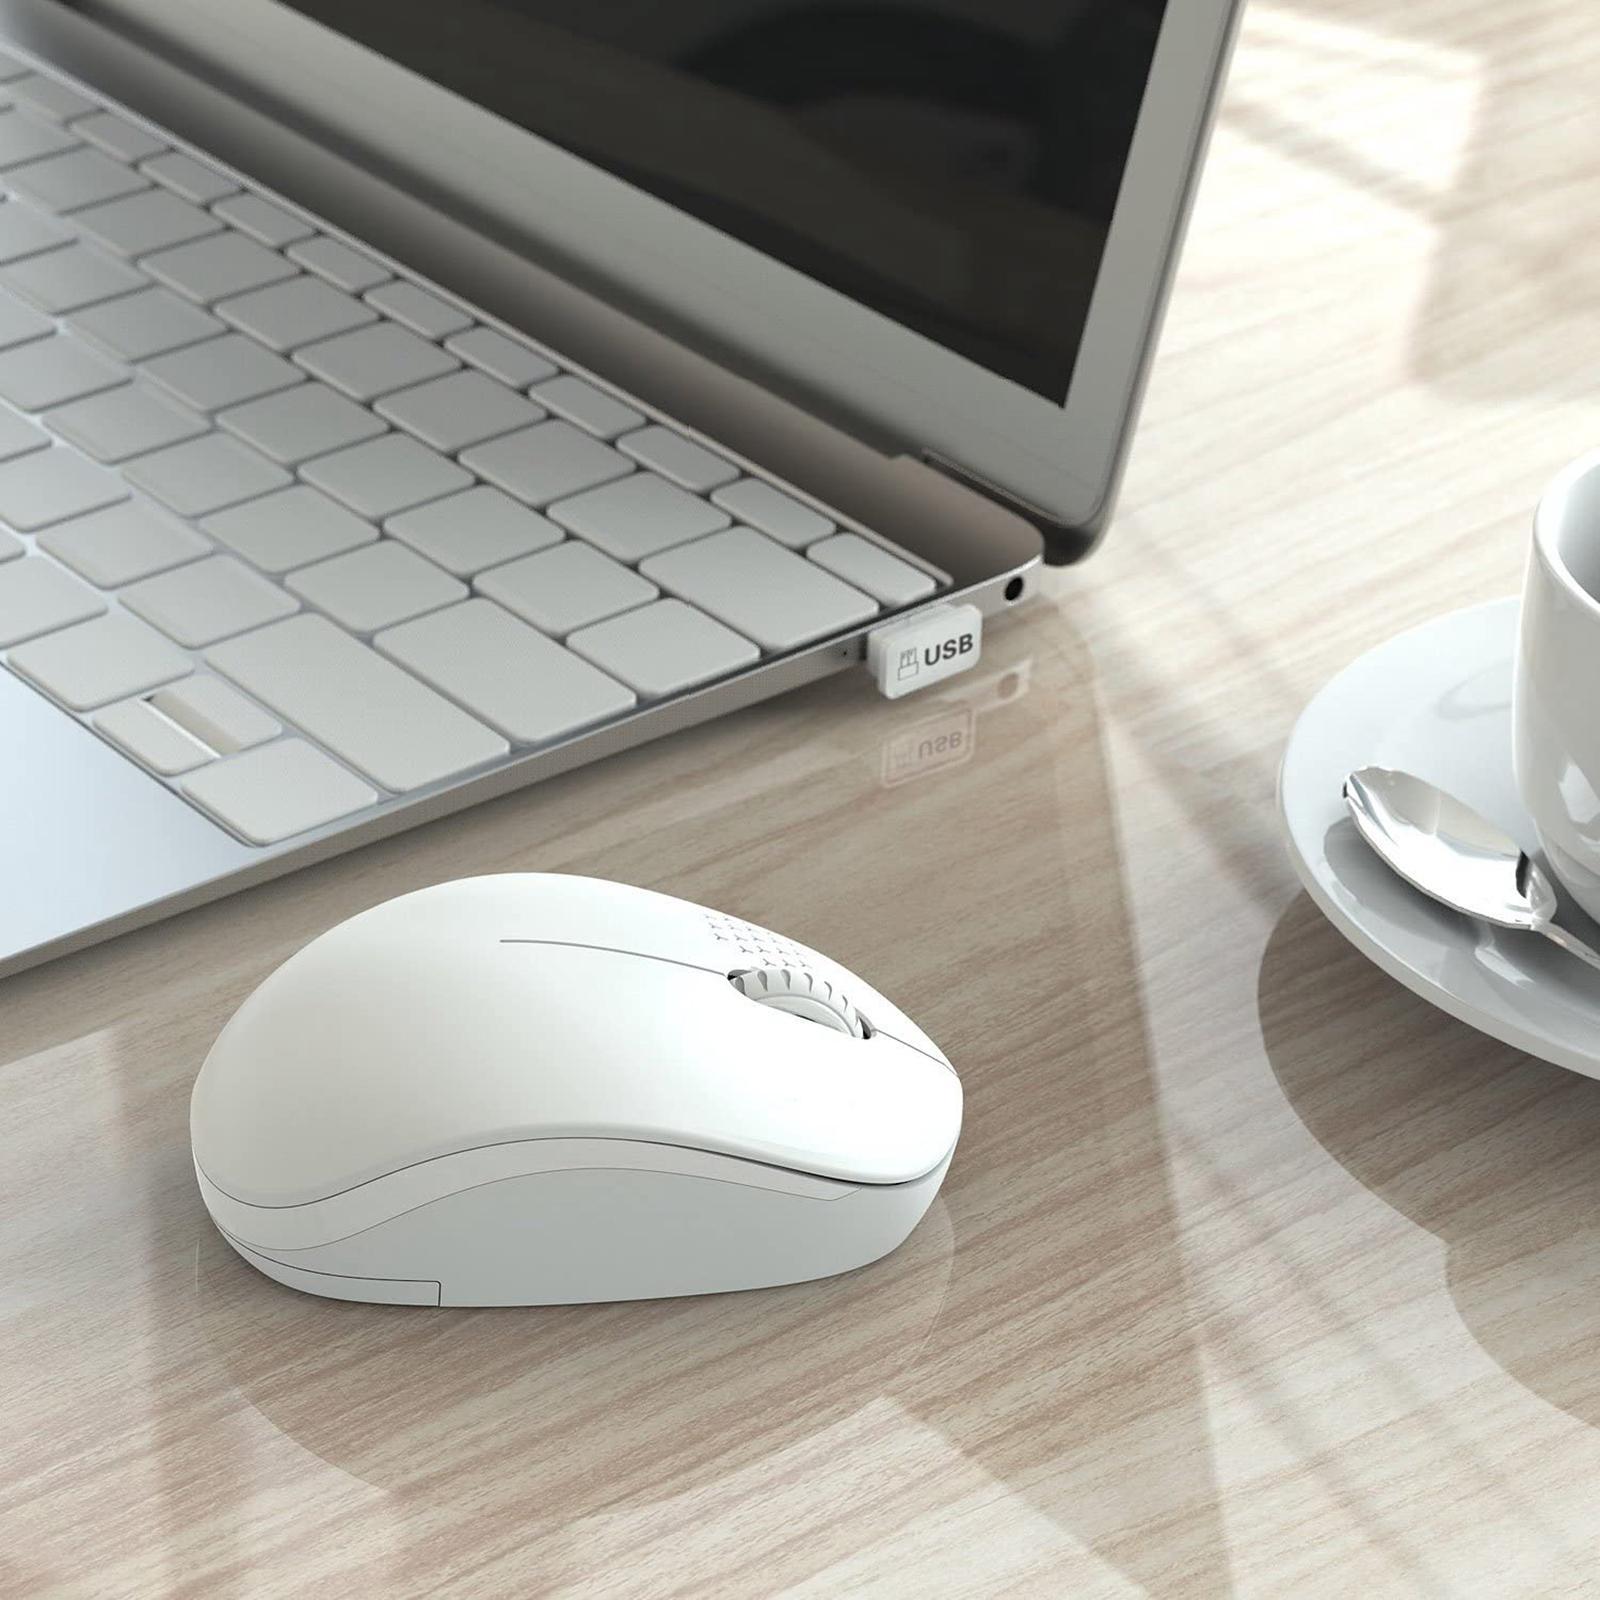 2.4G Wireless Mouse With USB Receiver For White Tablet PC